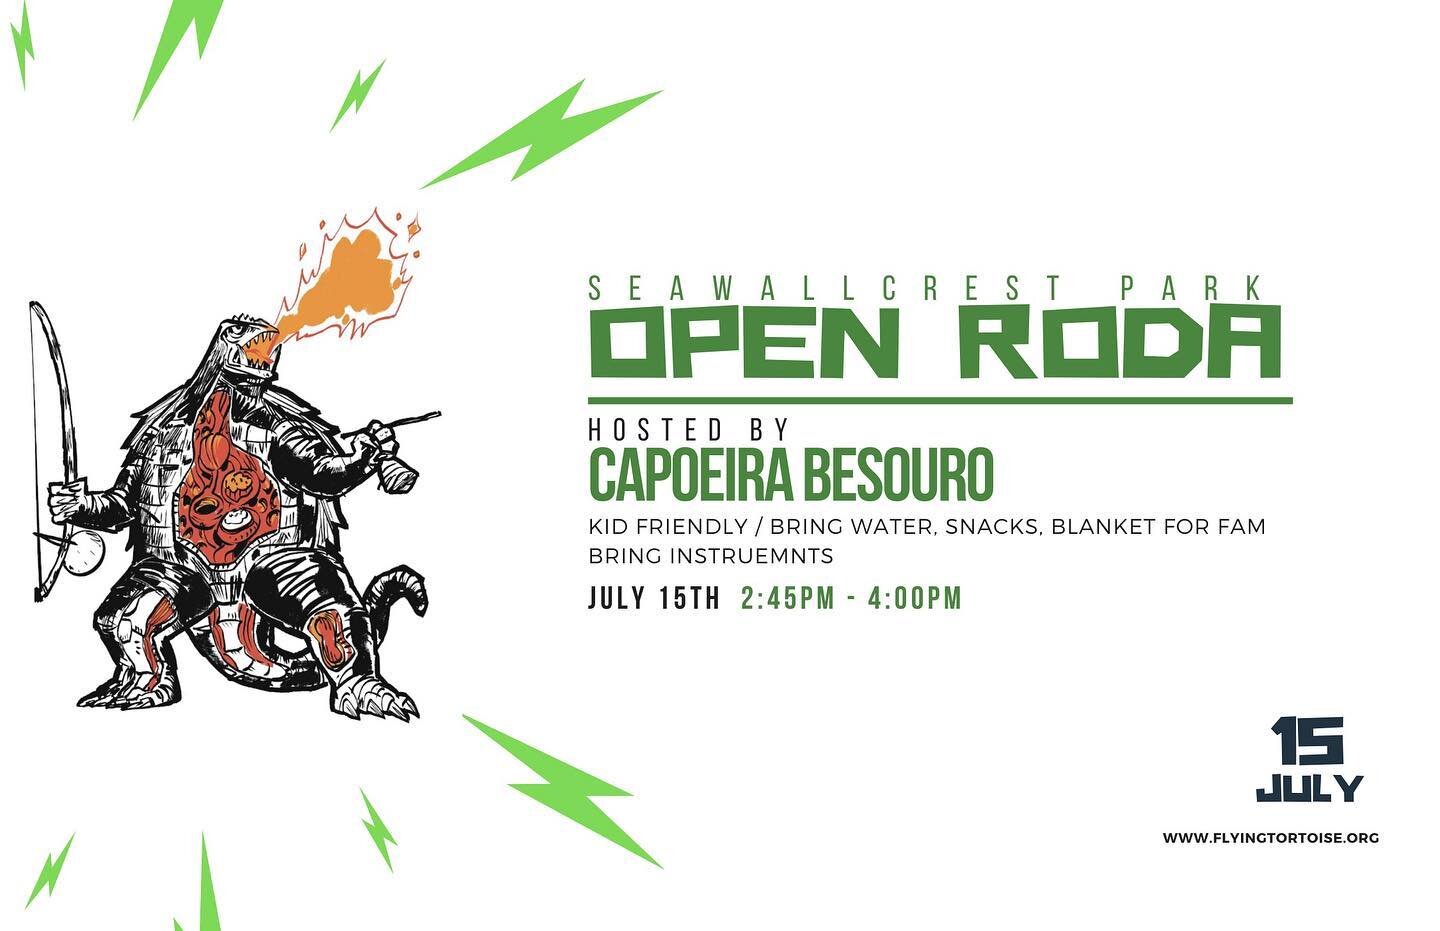 We will be hanging out next to the Flying Tortoise Beijing Bootcamp giving em an uplifting soundtrack and playin the games. Join us! #seawallcrestpark #parkcapoeira #capooeira #capoeirabesouro #pdxcapoeira #capoeirabesourooregon